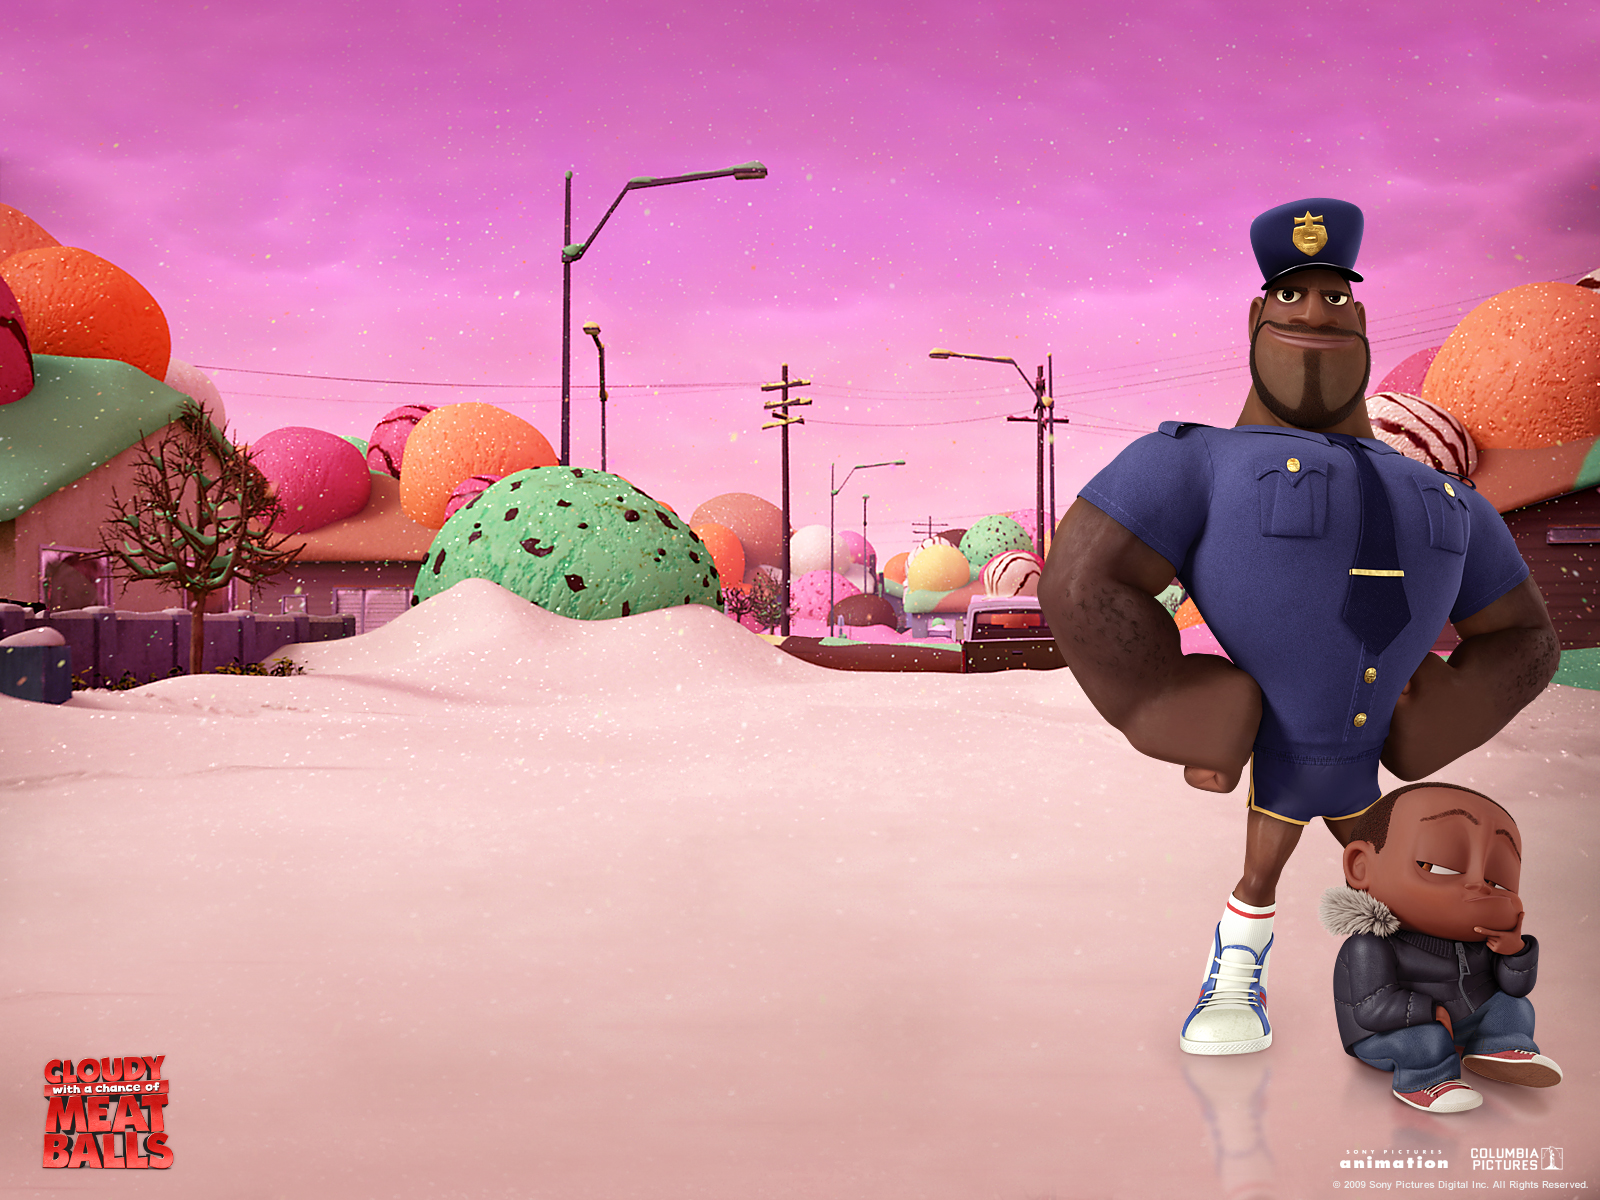 Movie Cloudy with a Chance of Meatballs HD Wallpaper Background Image. 